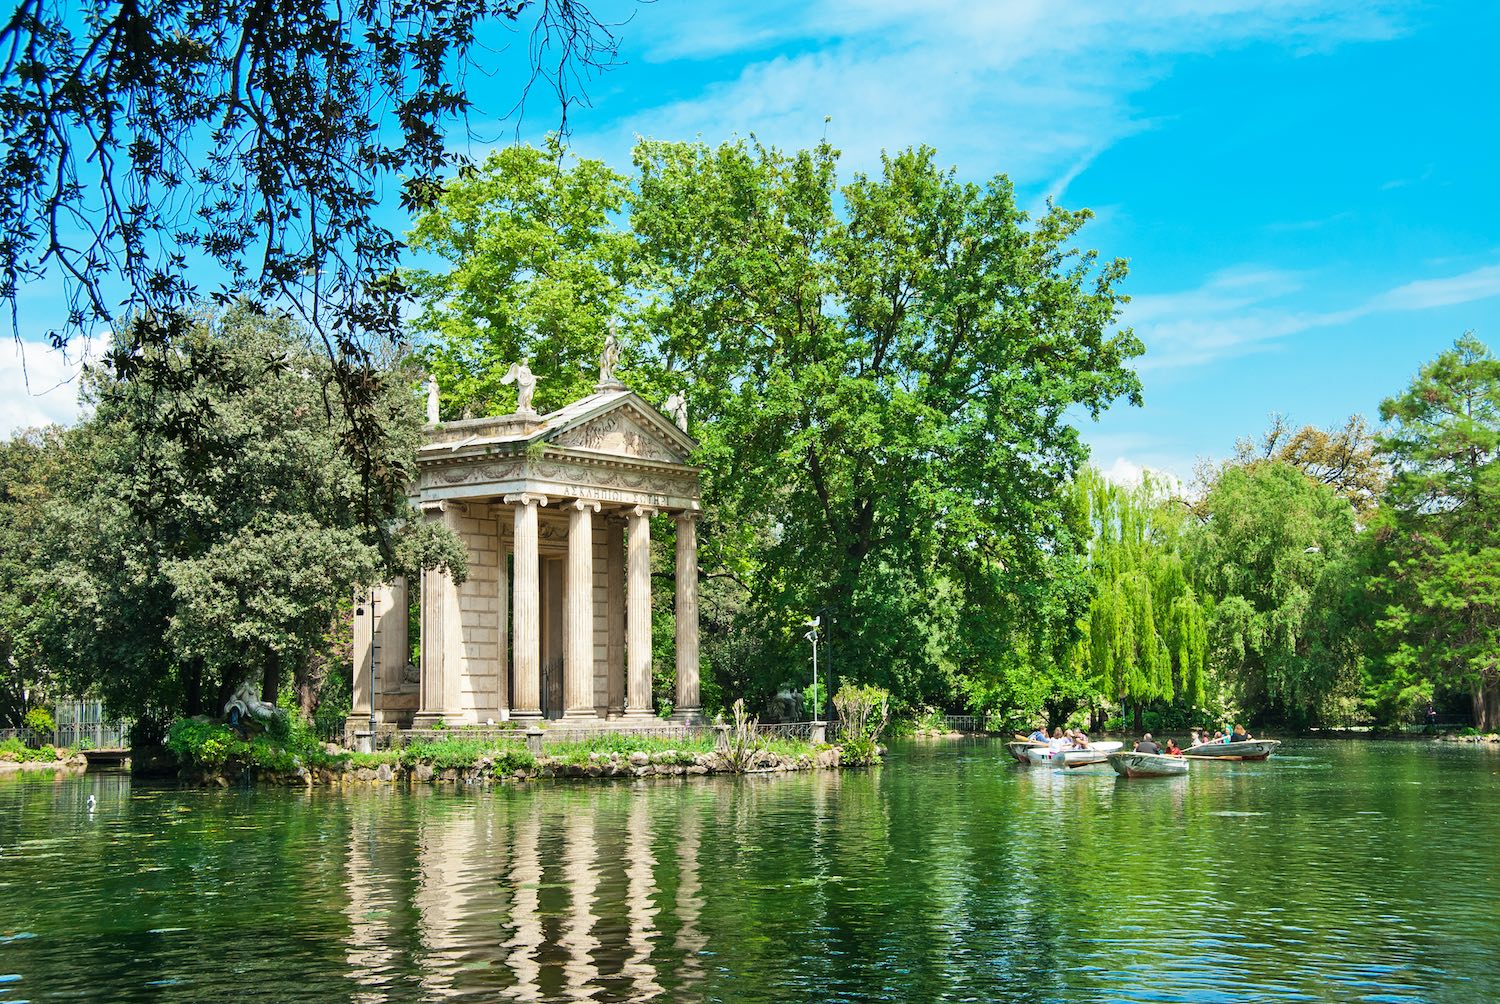 People rowing boats on water in front of Villa Borghese Pinciana, Pincian Hill, Rome, Italy